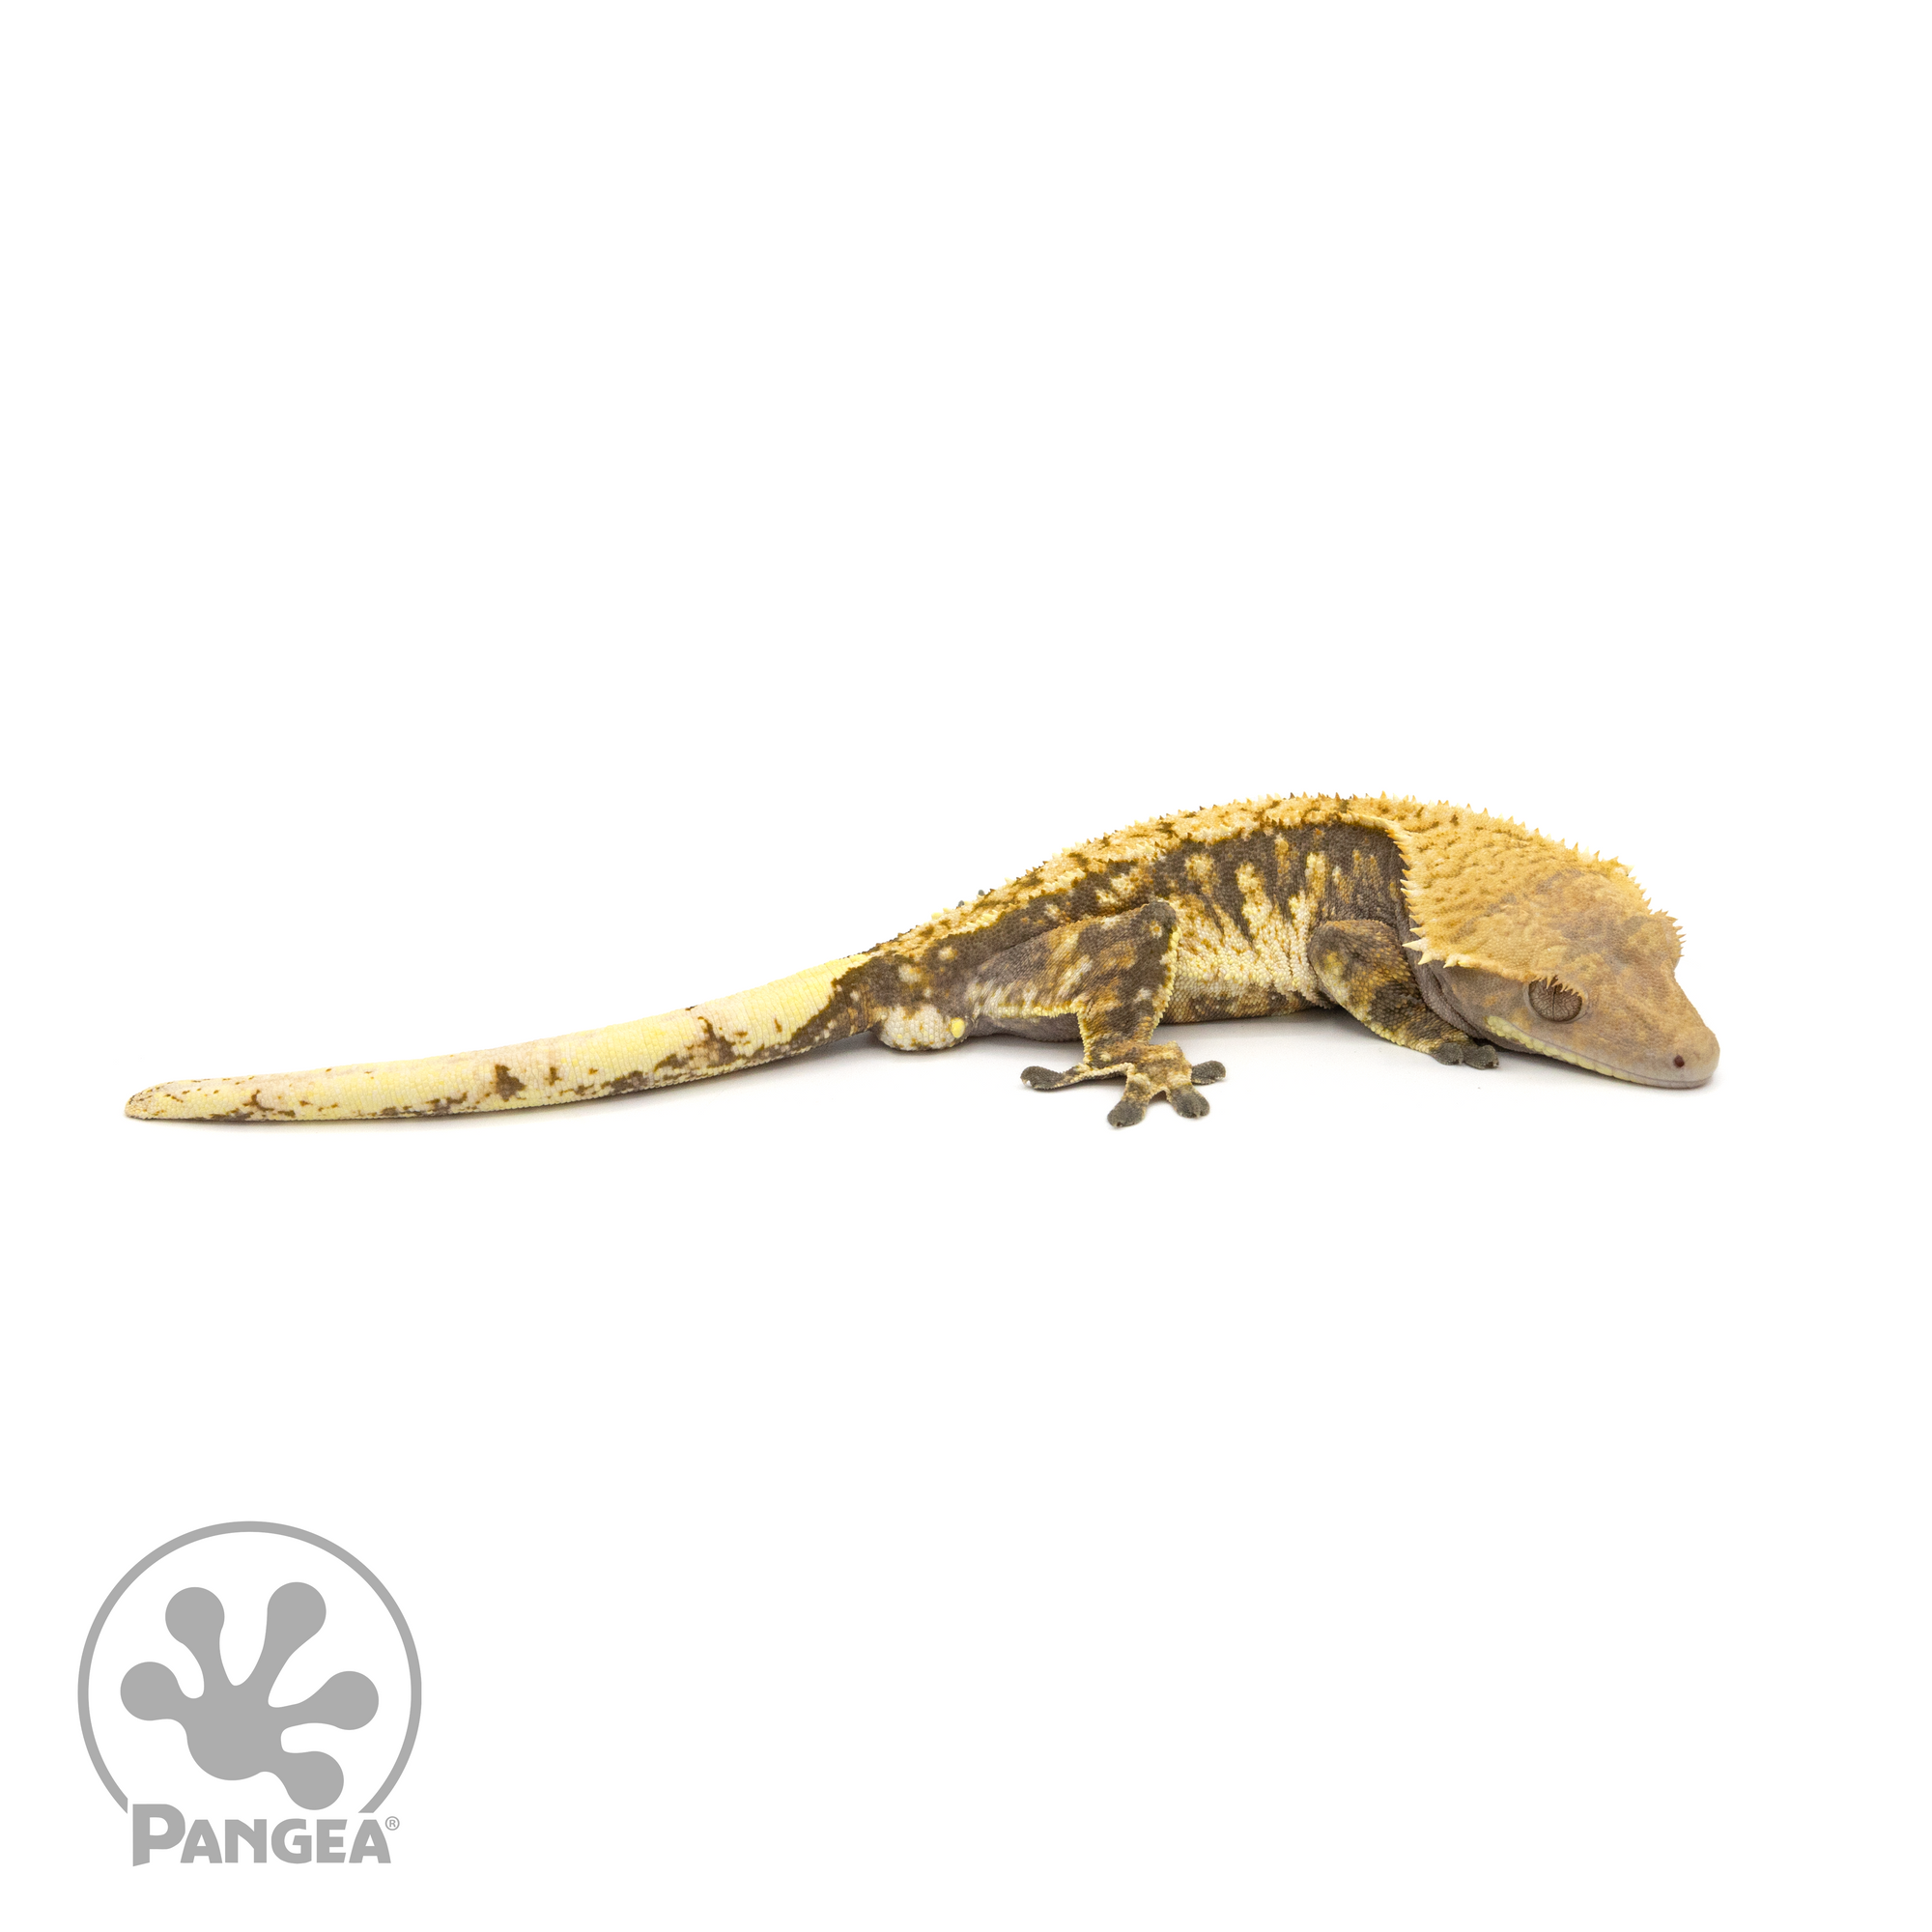 Male Extreme Harlequin Tricolor Crested Gecko Cr-1281 looking right 